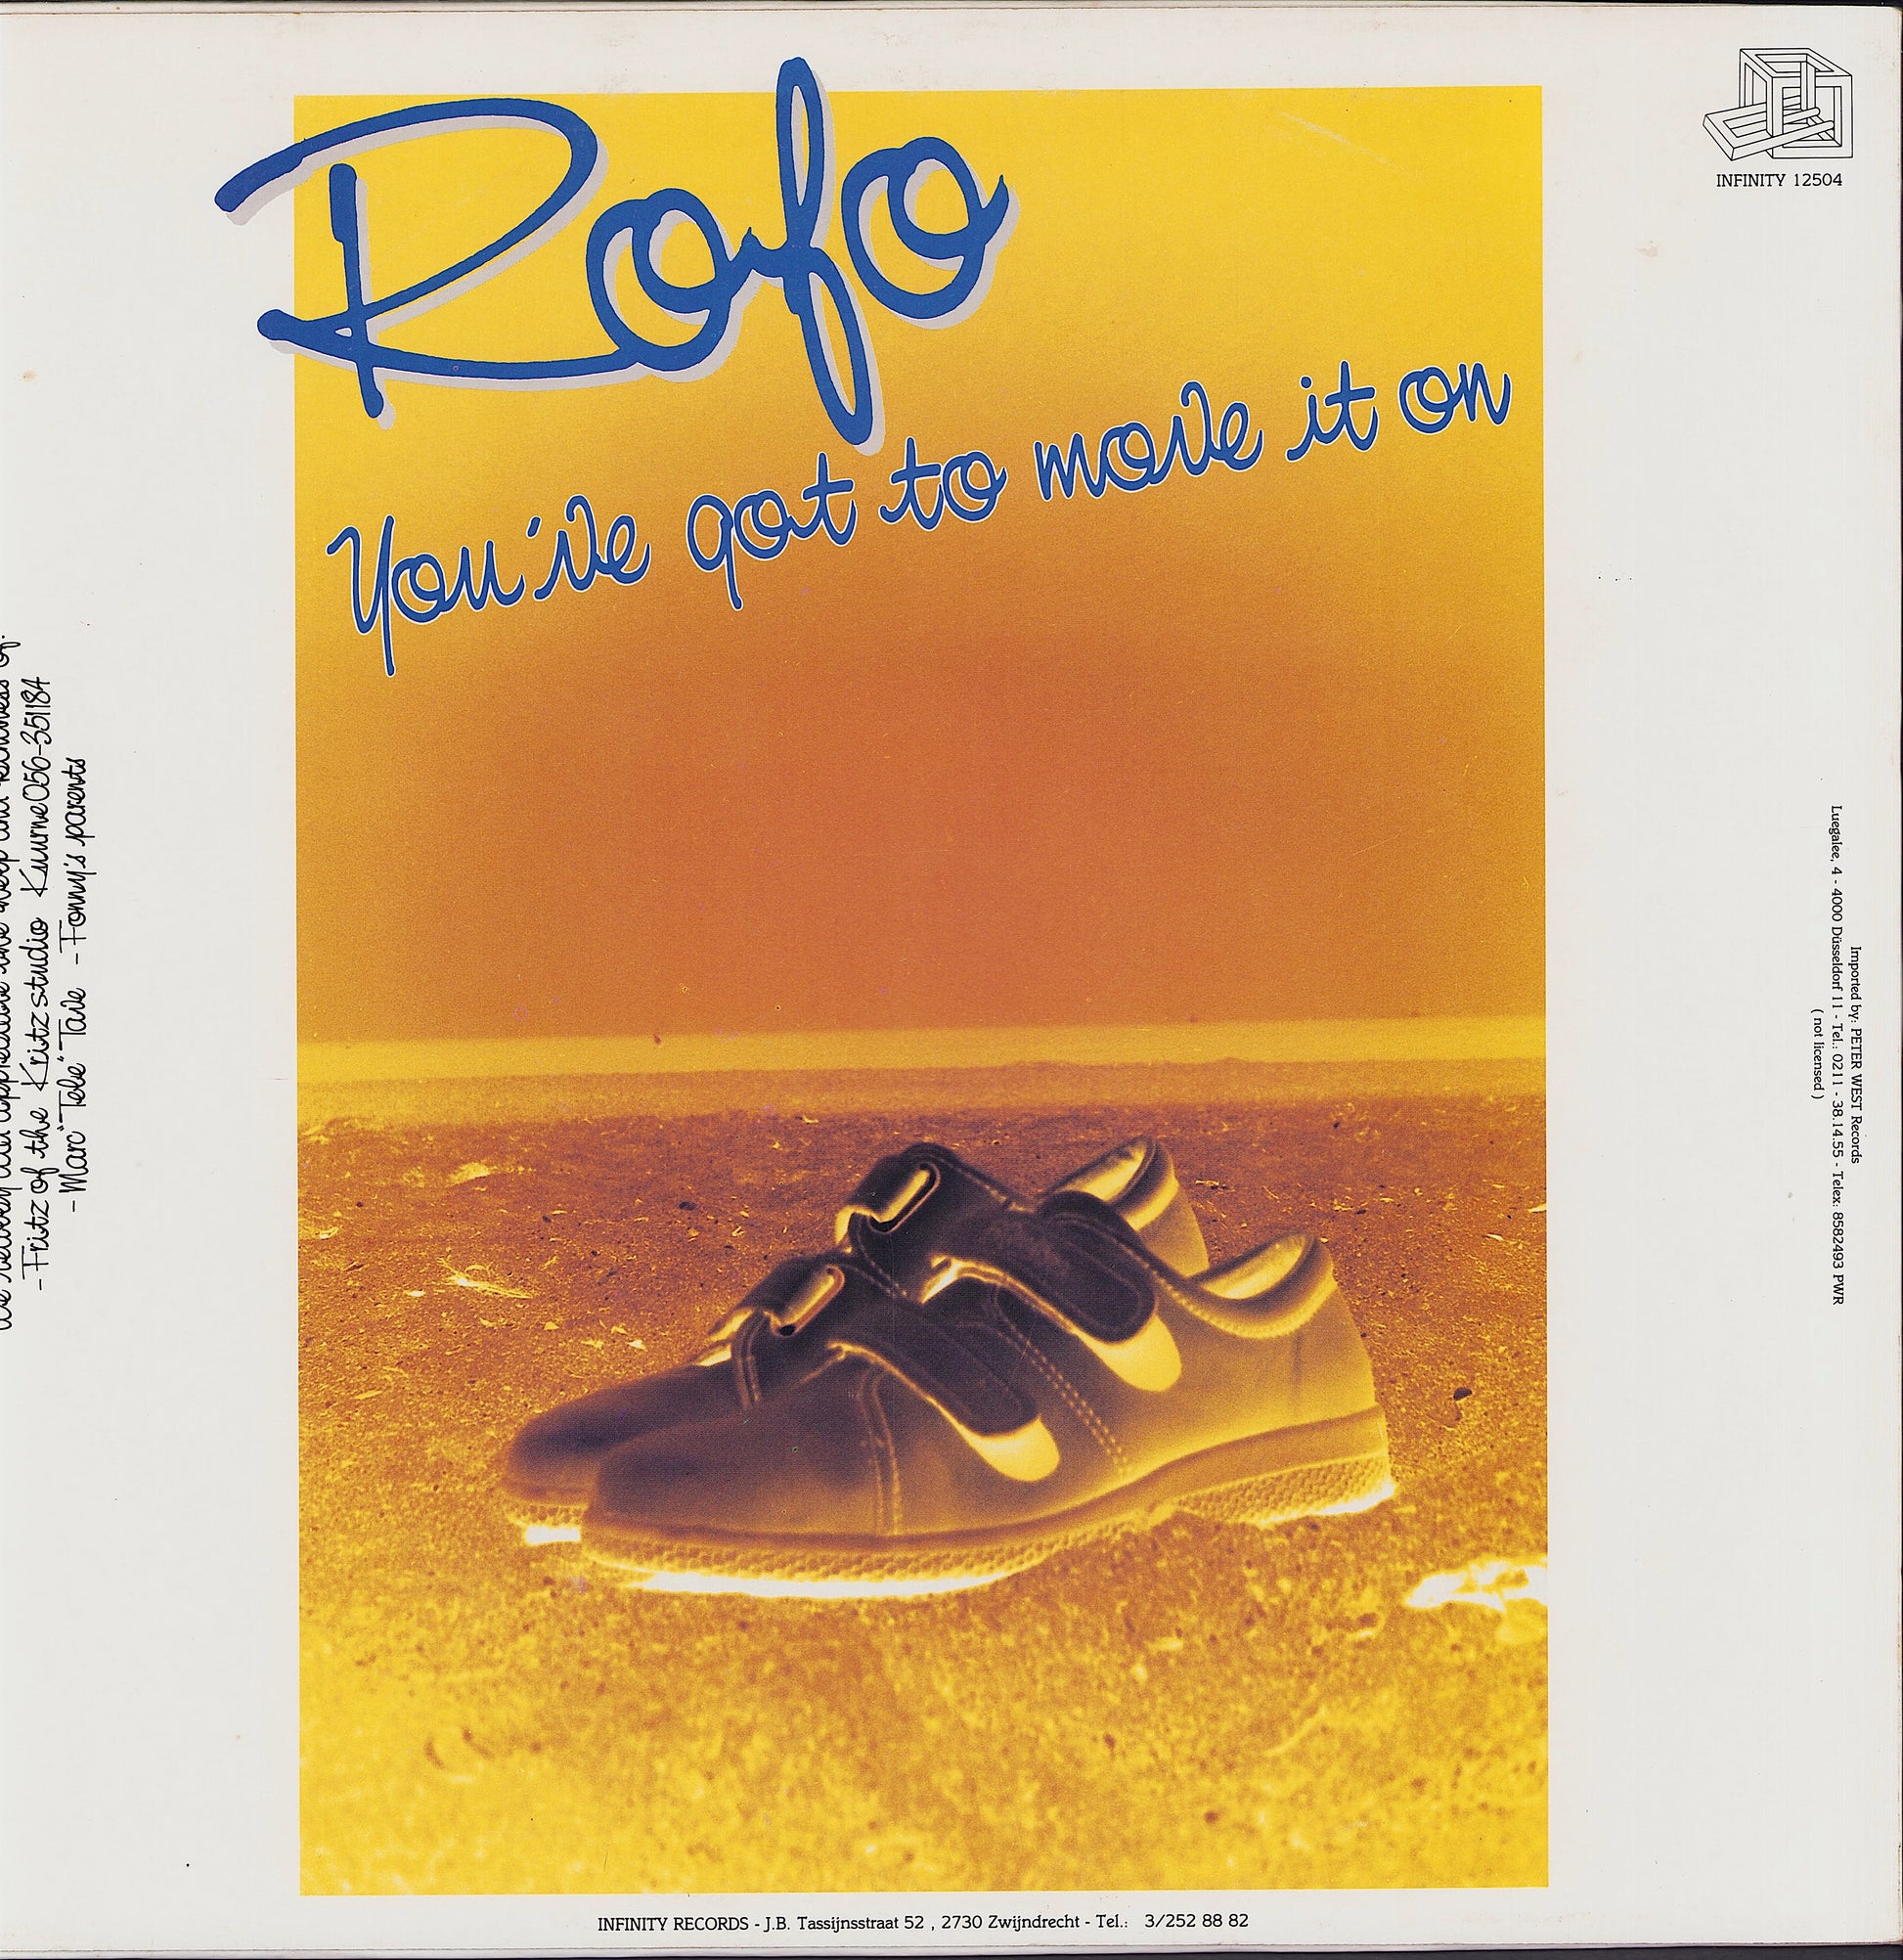 Rofo ‎- You've Got To Move It On Vinyl 12"